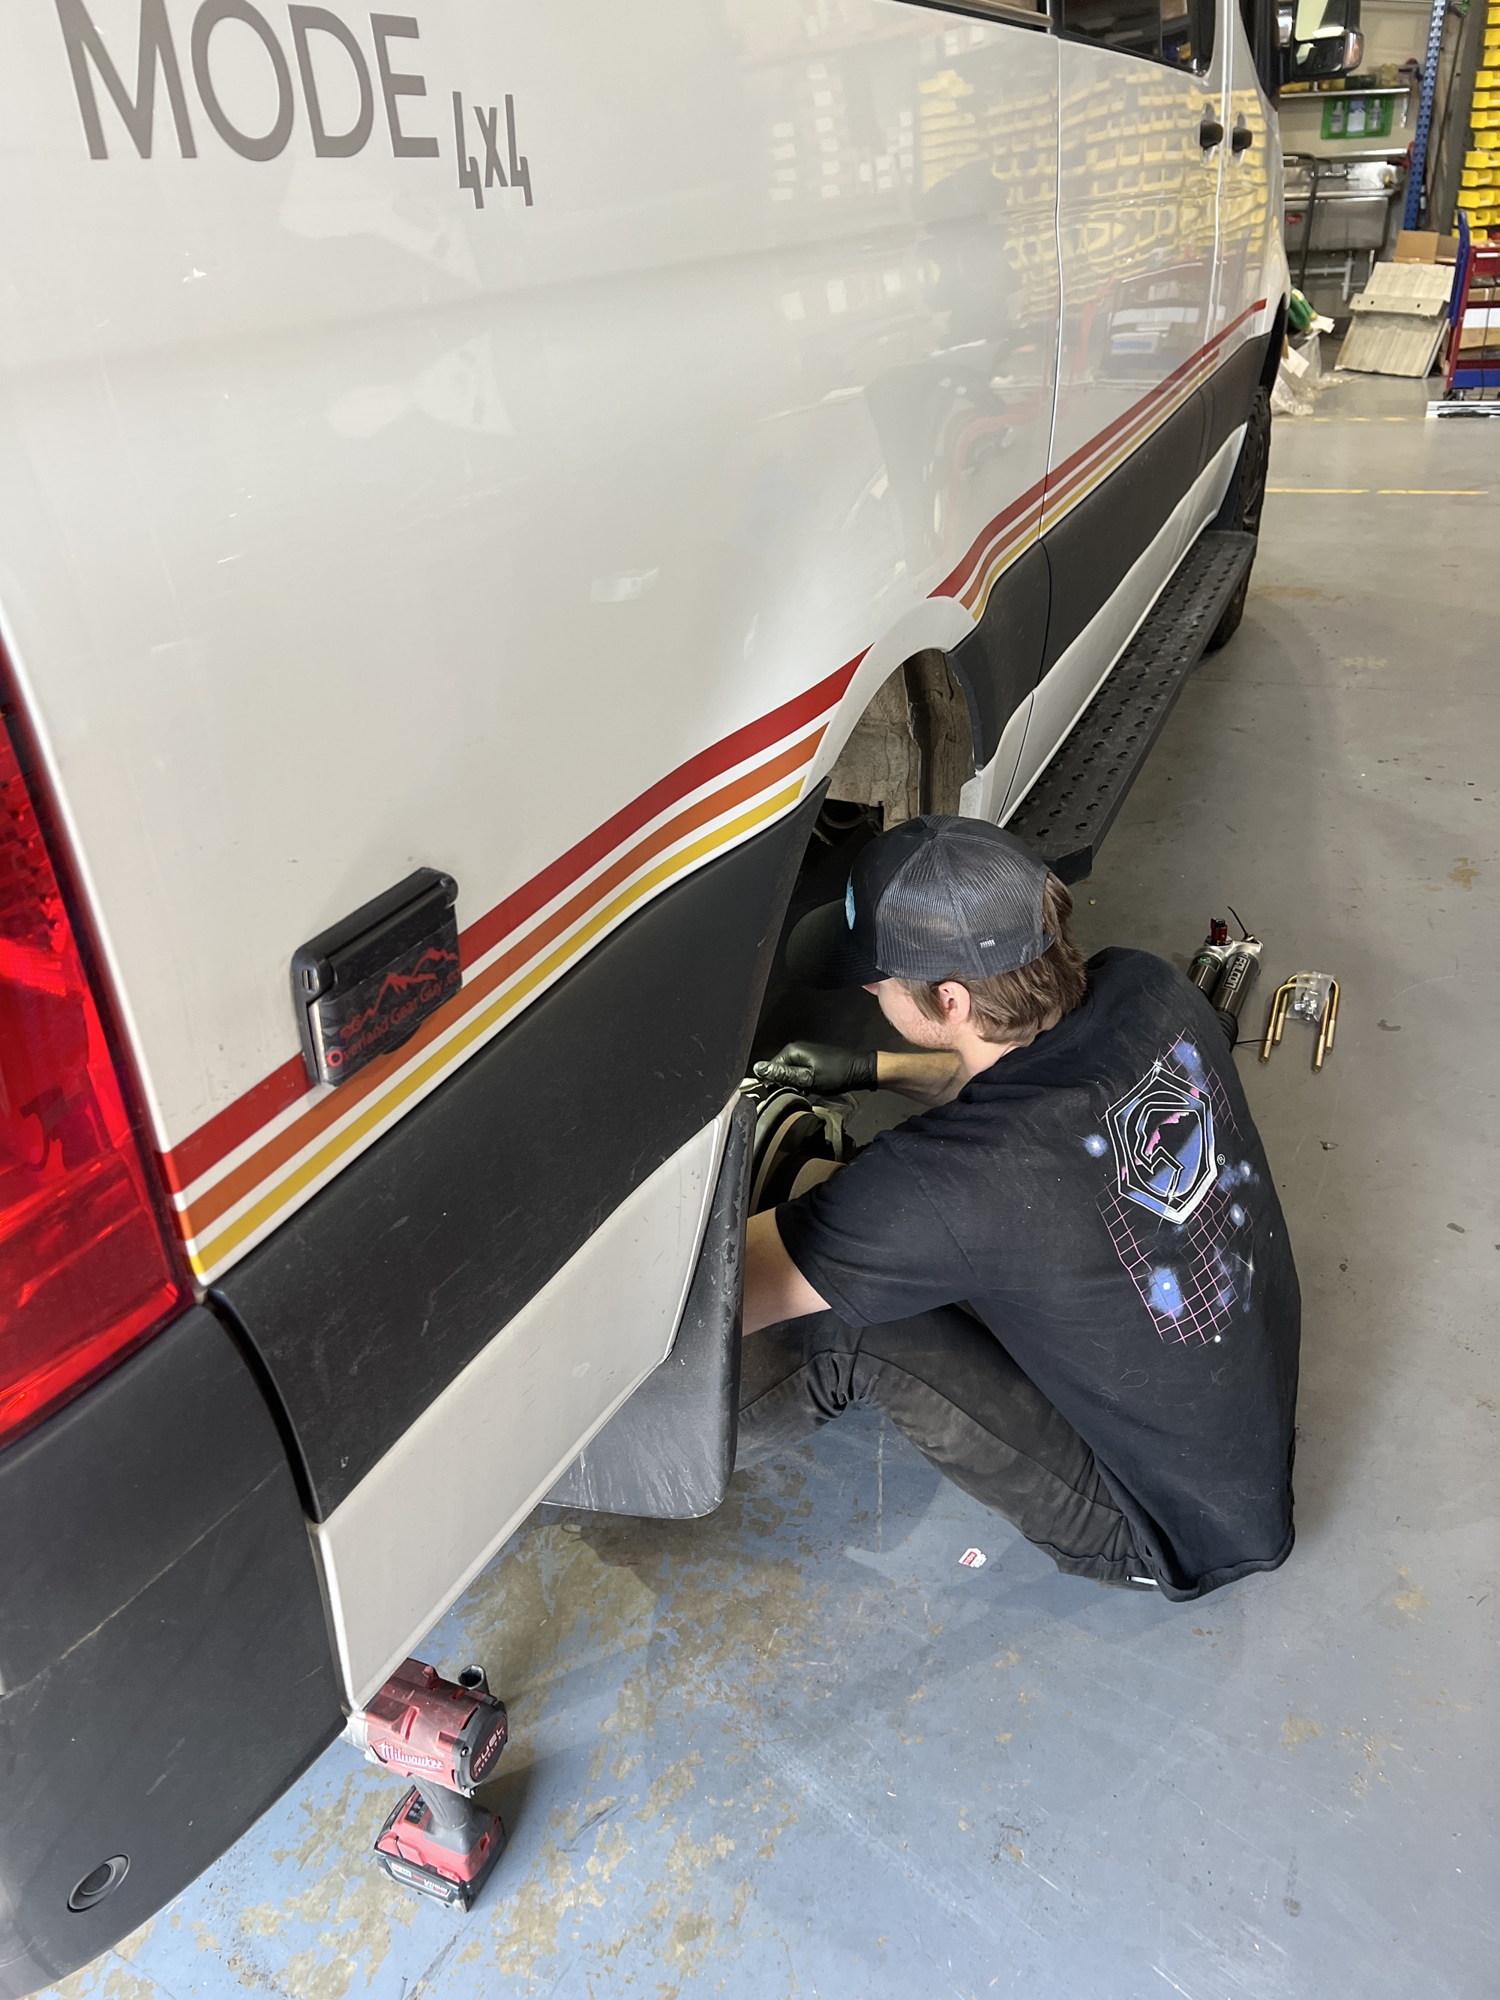 In addition to customizing vans, FreedomVanGo also does maintenance.